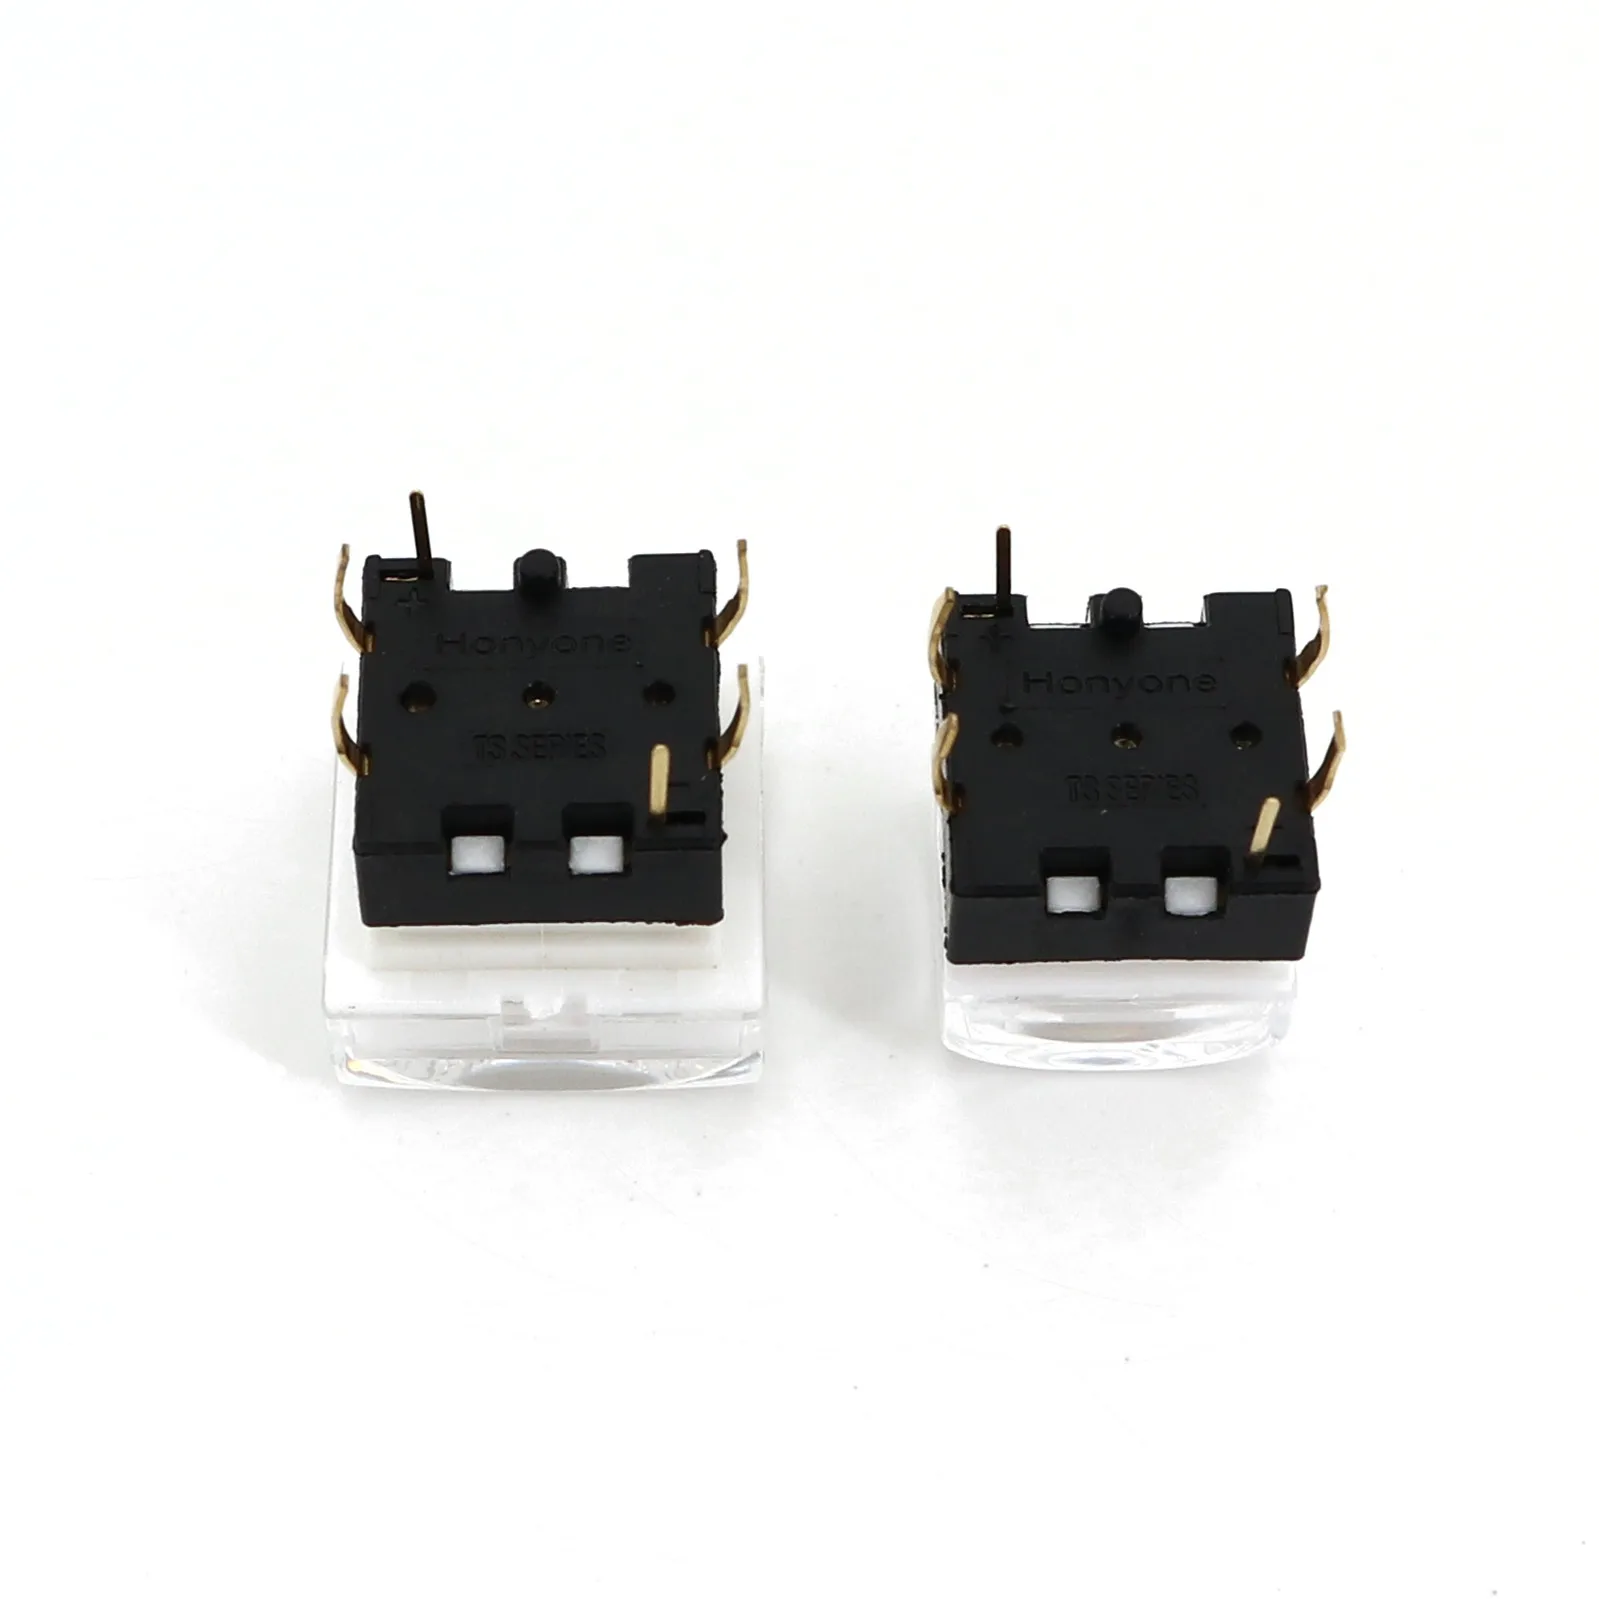 Honyone TS26 Series Square With LED Momentary SPST PCB Mini Push Button Tact Switch For Video Processor images - 6